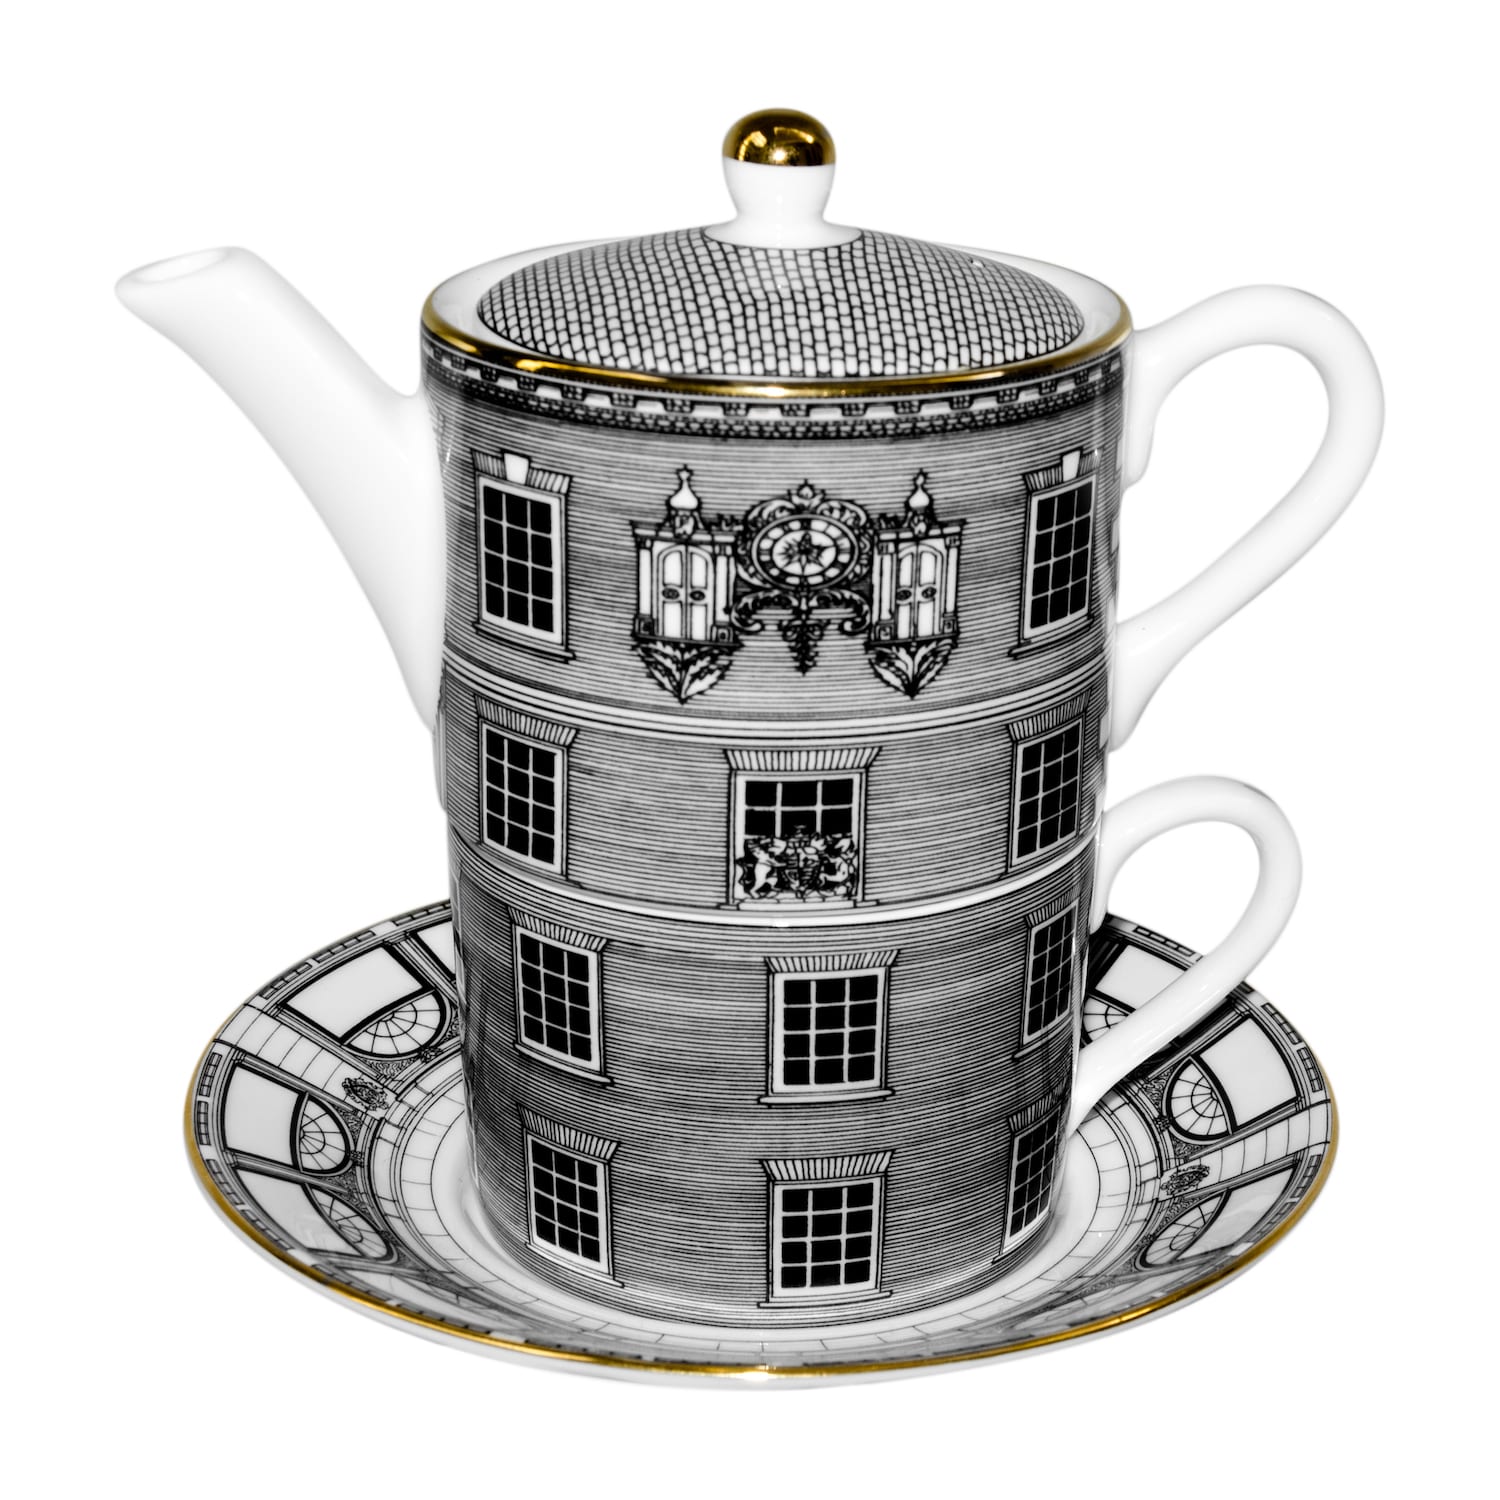 Landgoed bord wimper Fortnum & Mason Picadilly London Facade Tea for One & Saucer